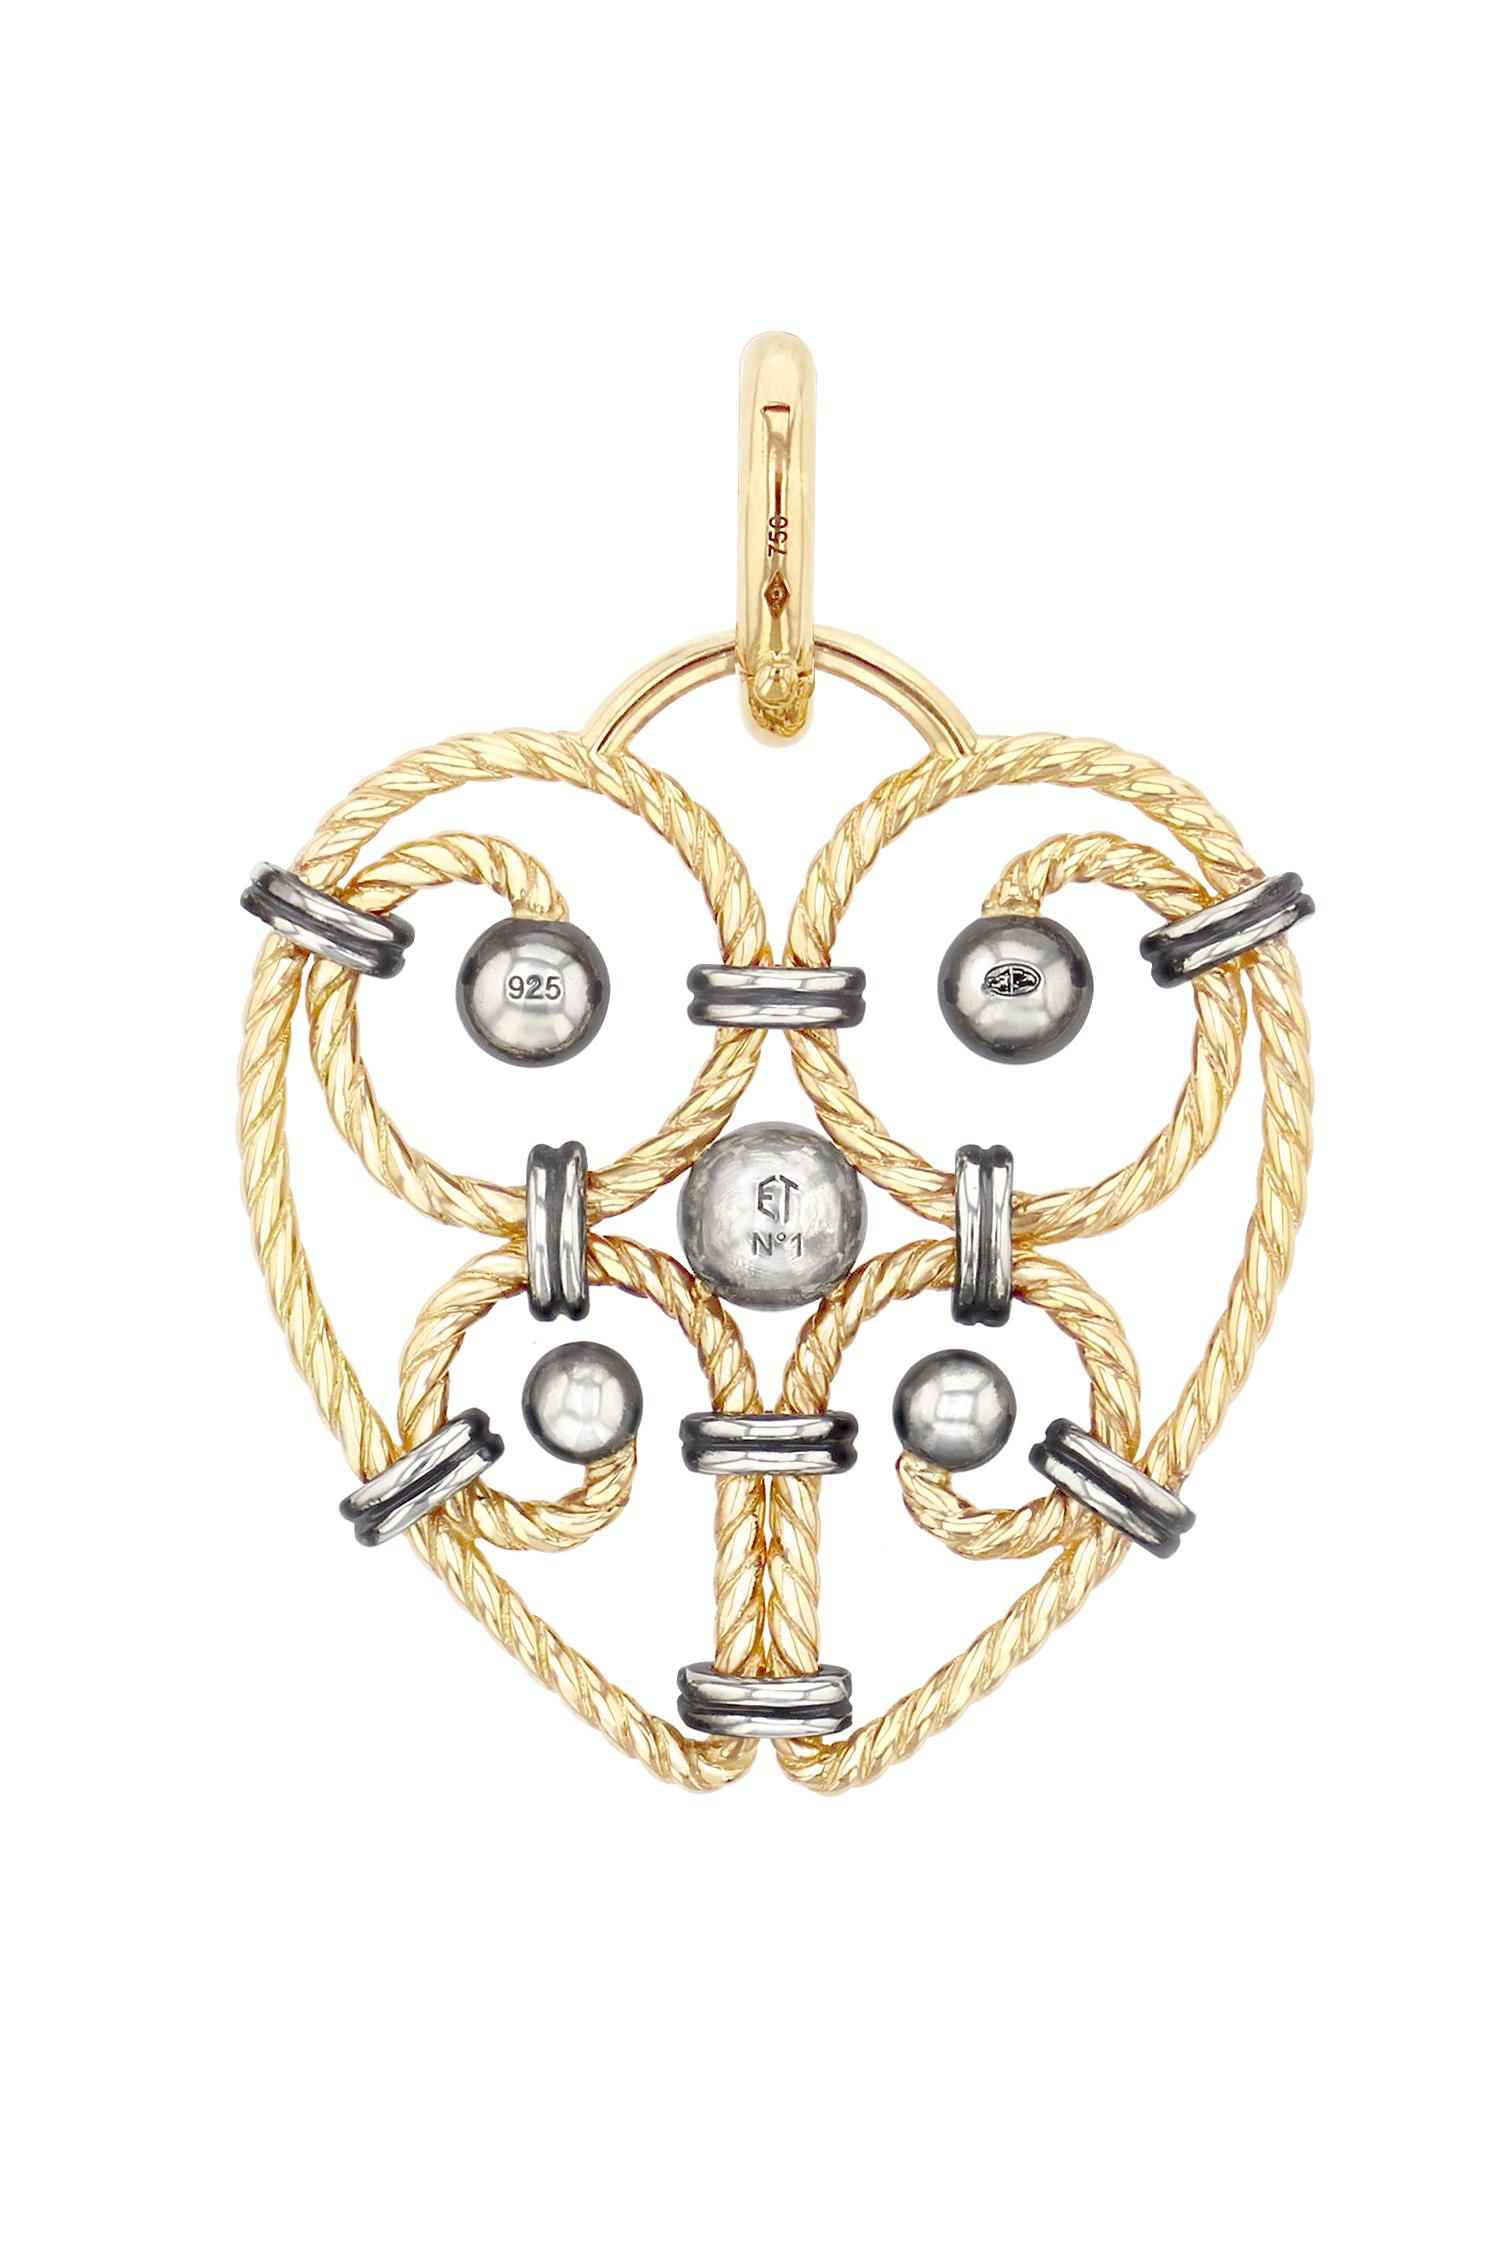 Cœur charm, gold serpentine twist punctuated with distressed silver balls set with a diamond and held by a set of distressed silver rings. Openable gold bail. 

Sold without chain.

Available with chain on request. 

Details: 
GHVS Diamonds: 0.26